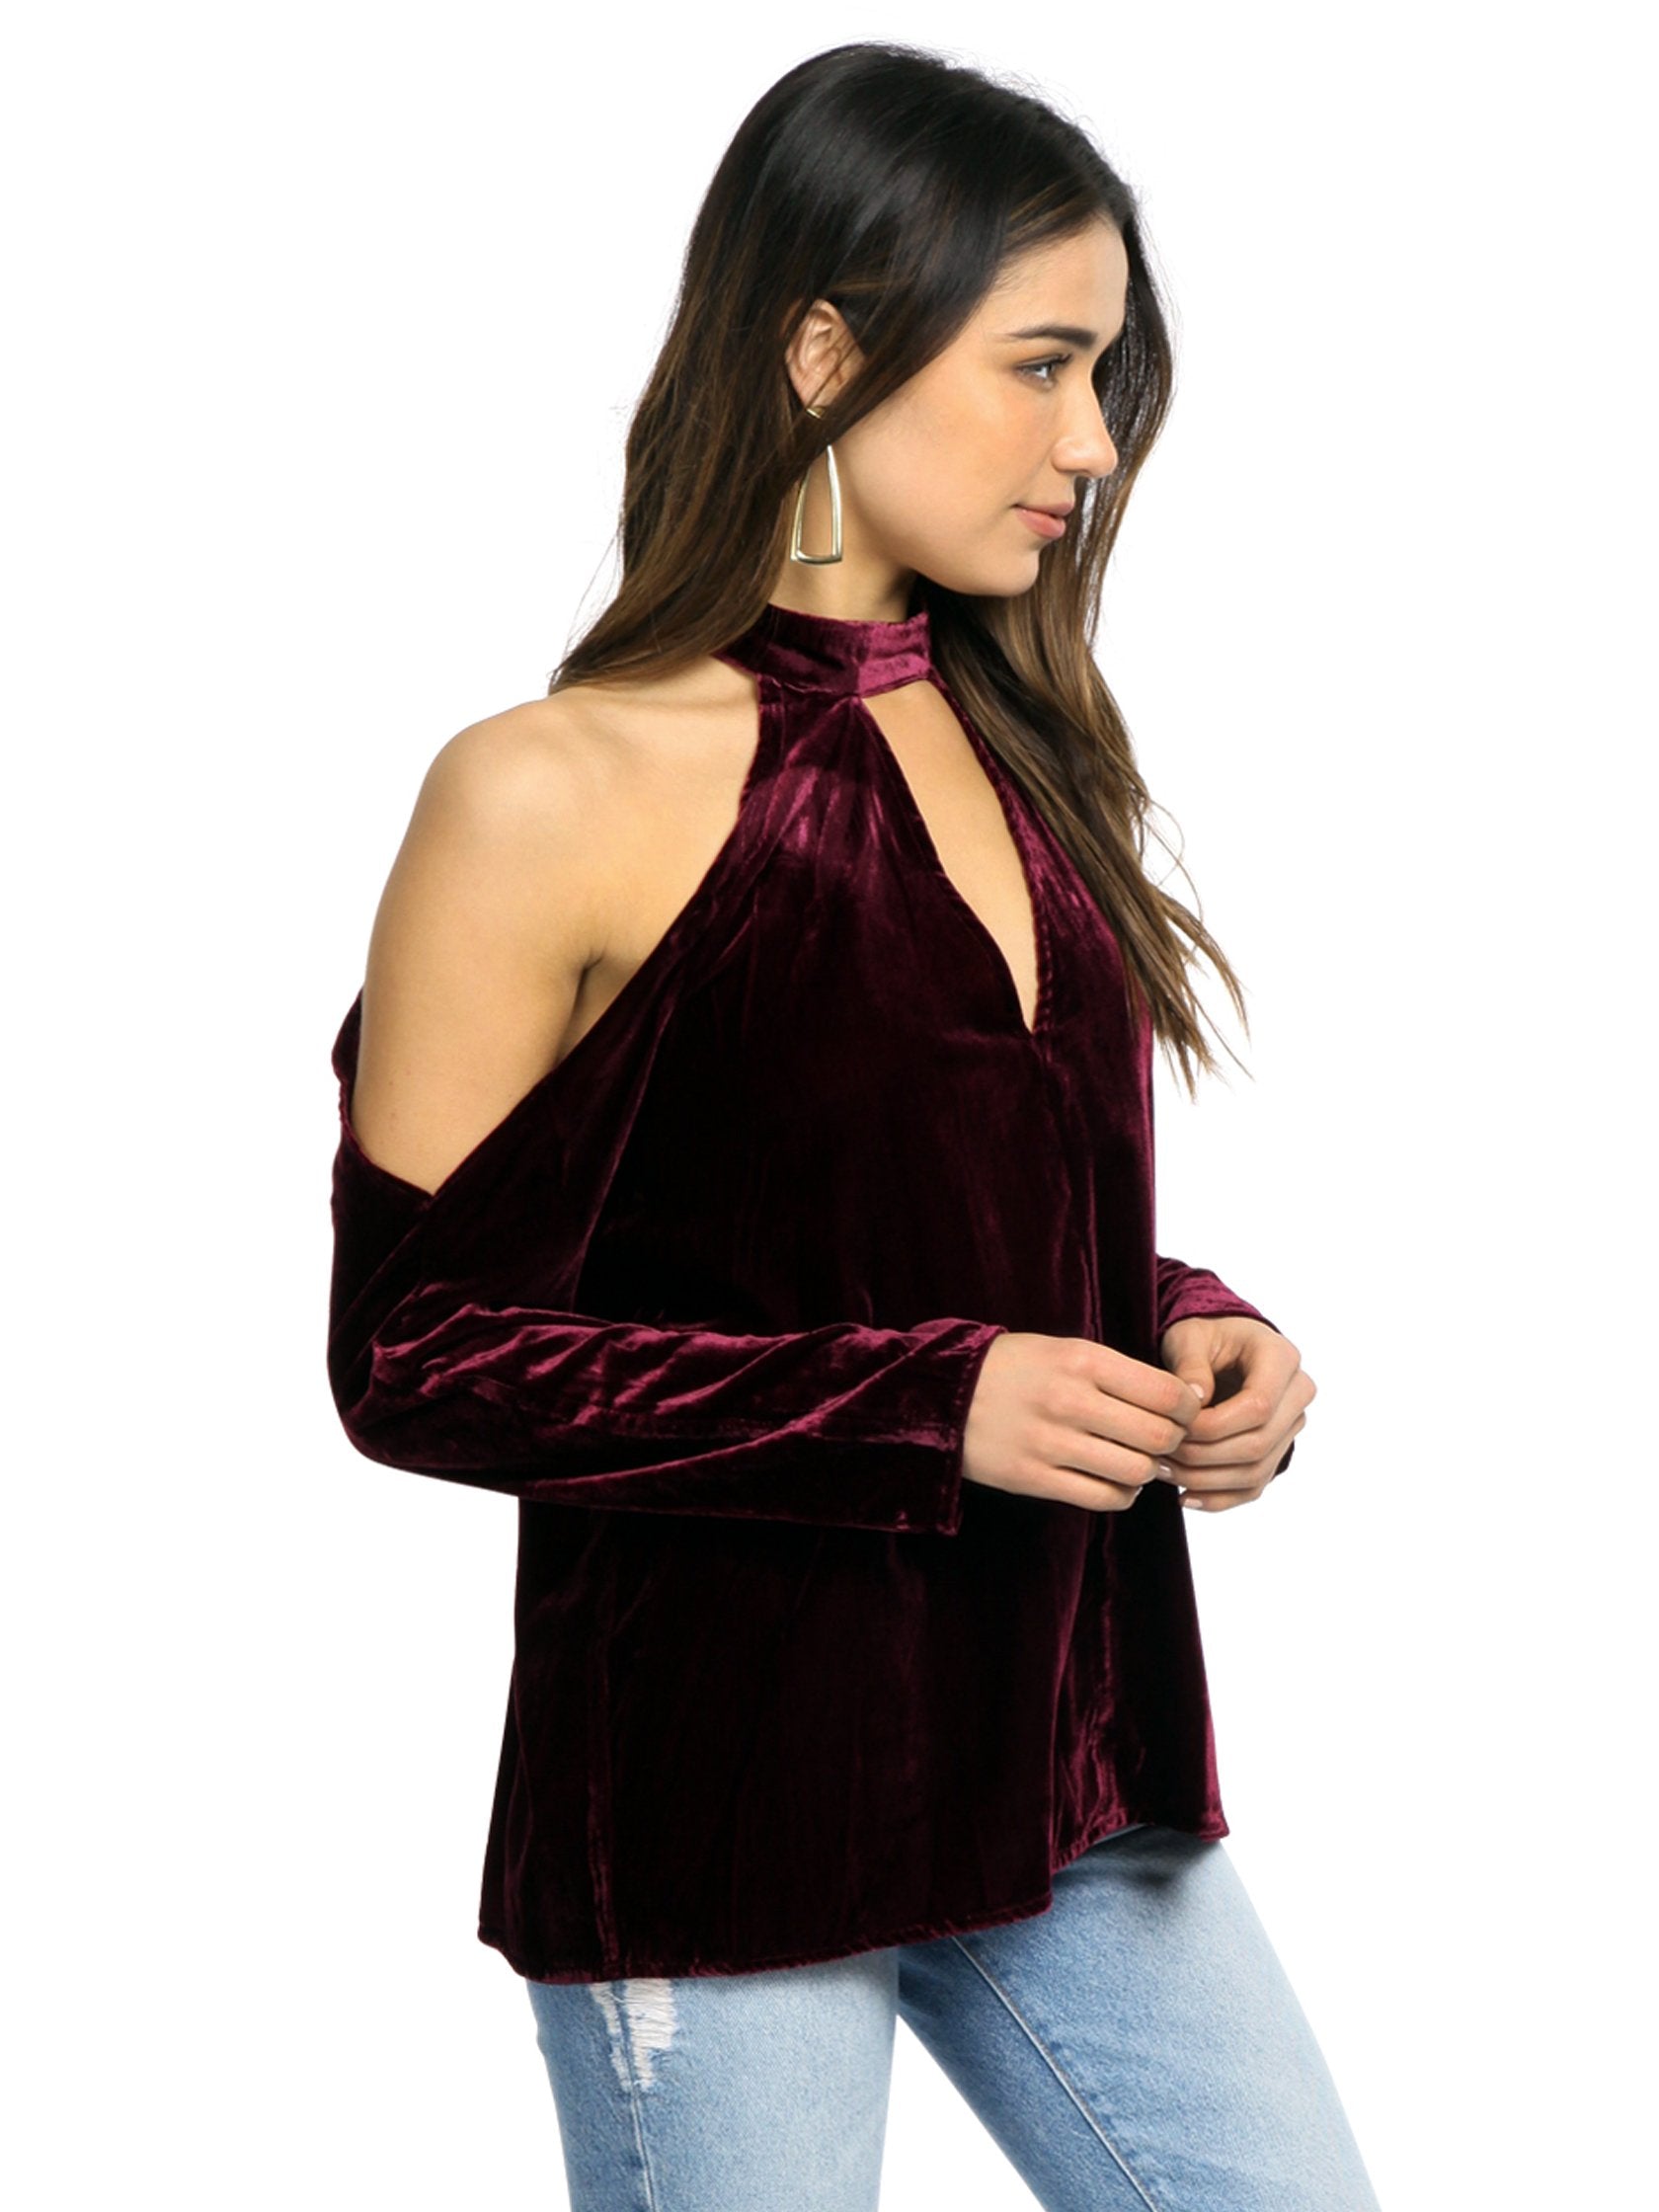 Women wearing a top rental from YUMI KIM called Hot And Cold Velvet Top